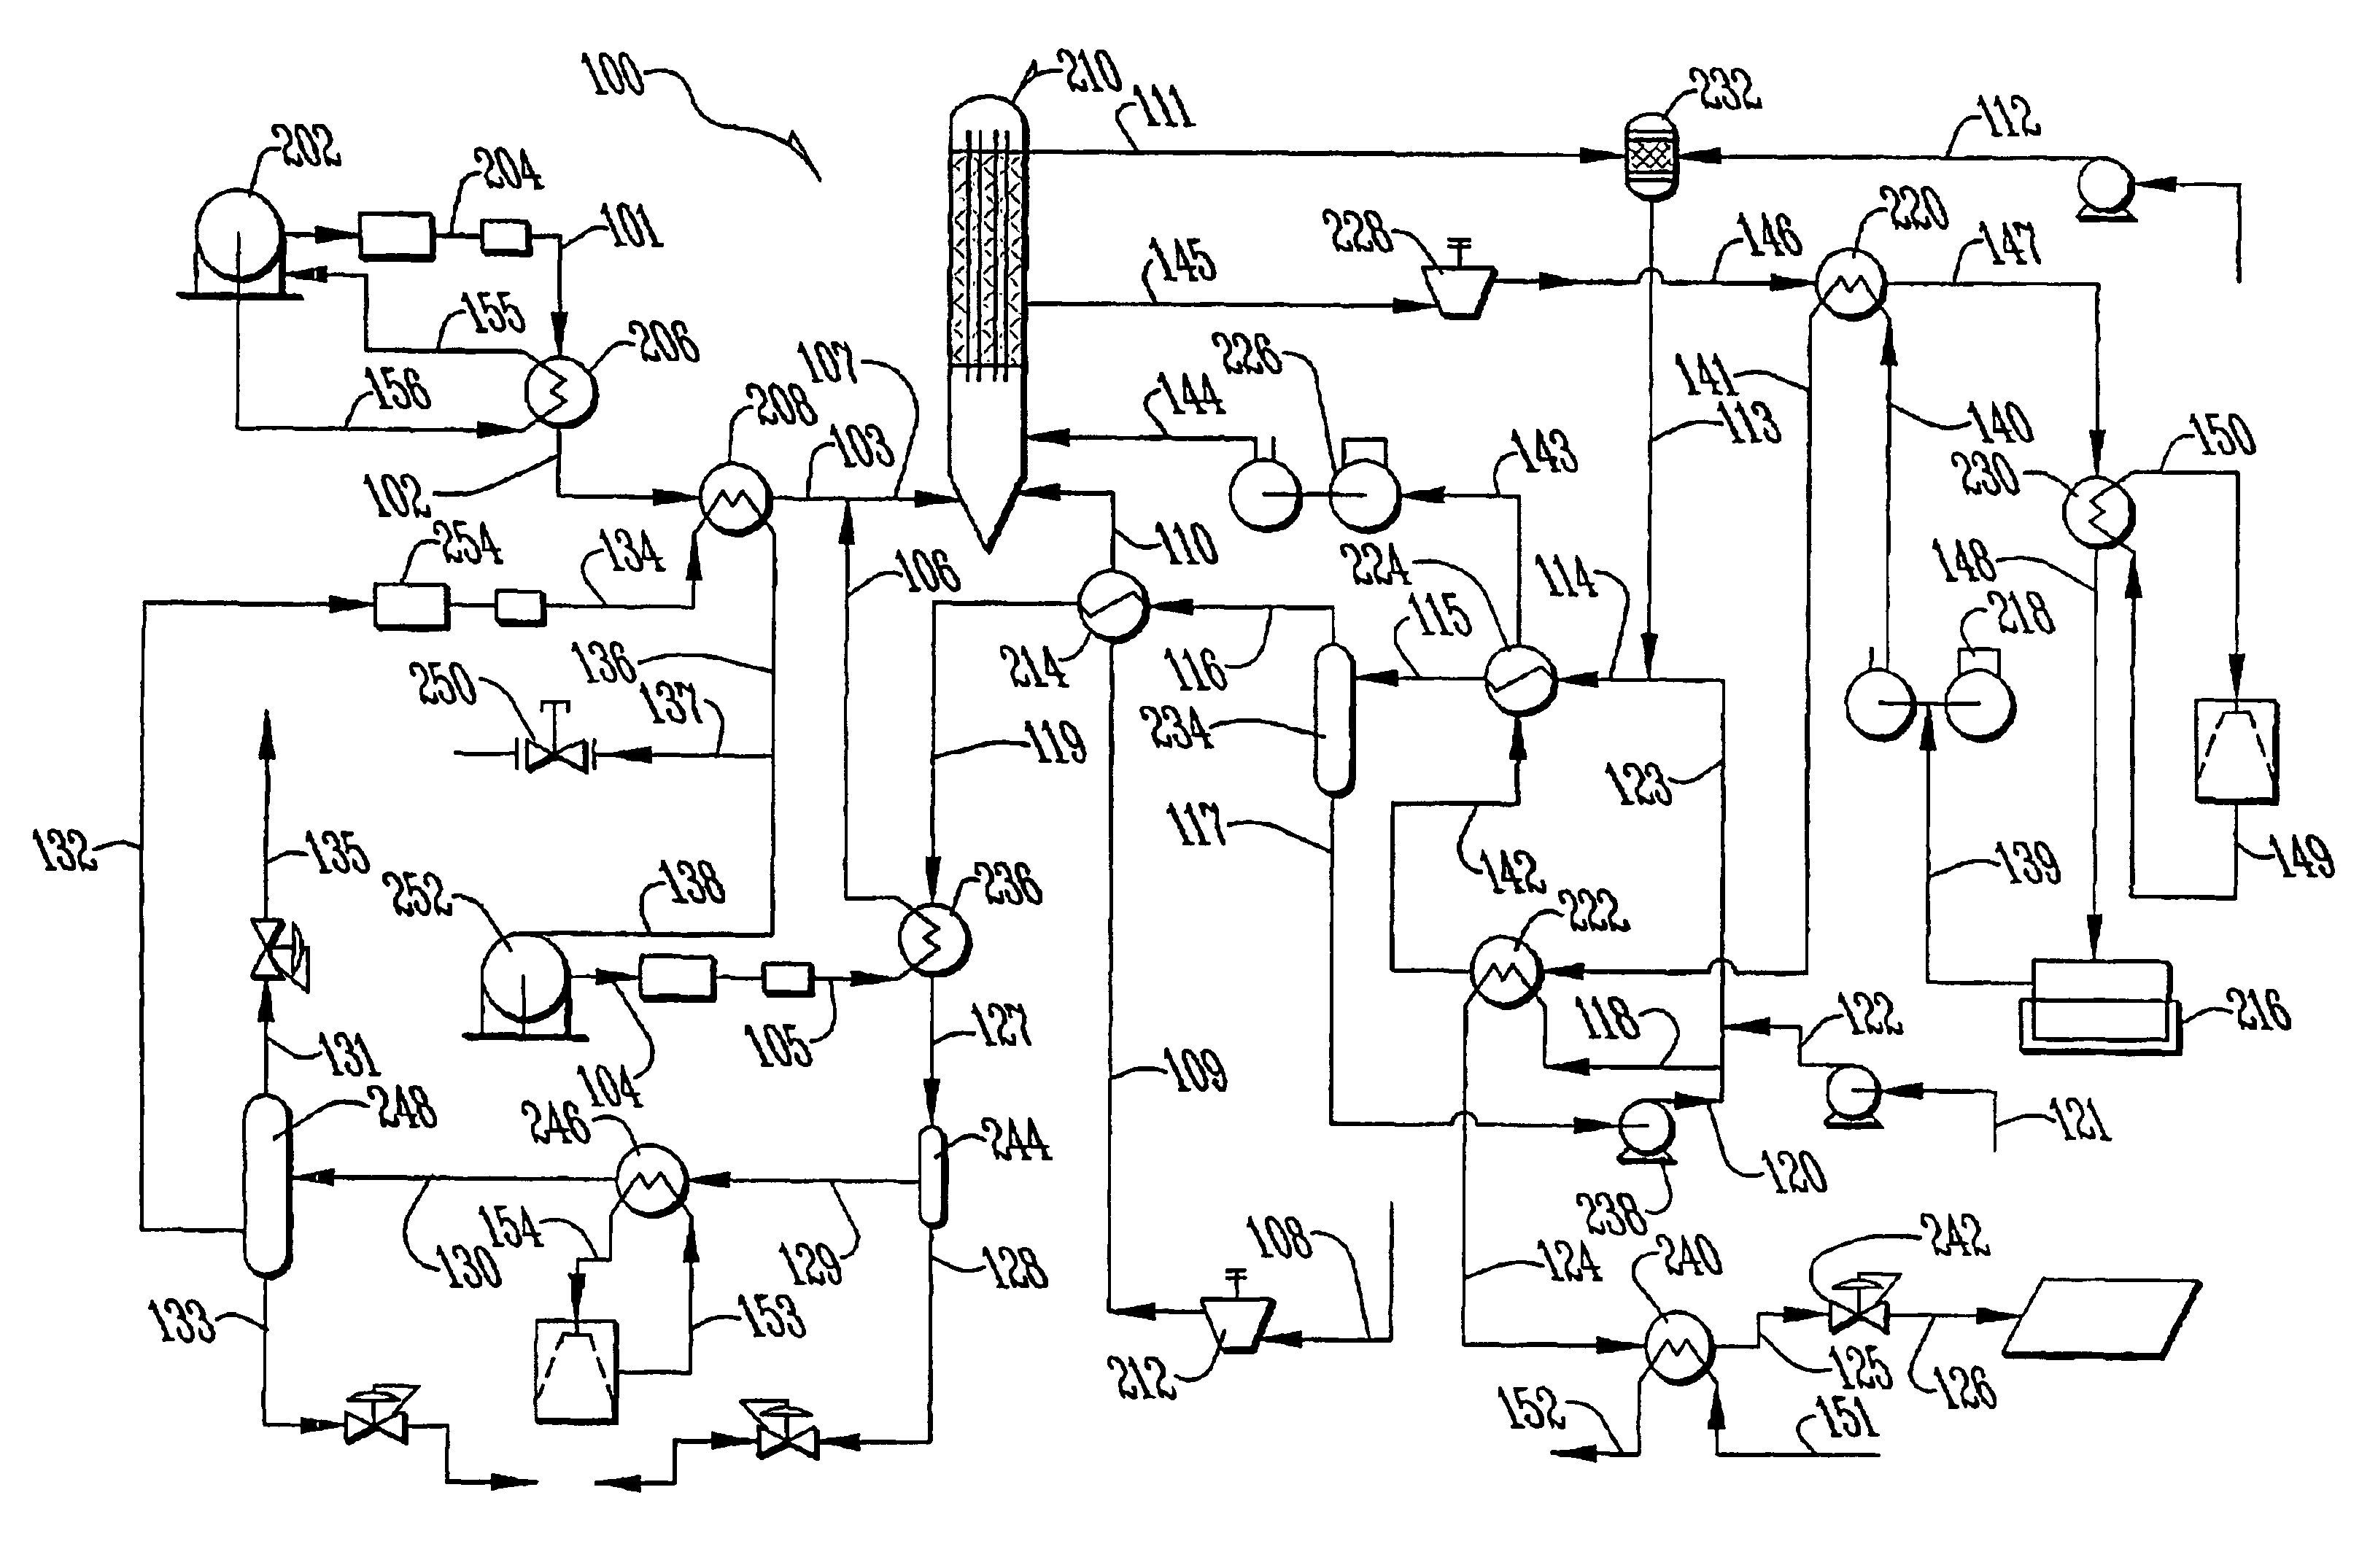 Power system with enhanced thermodynamic efficiency and pollution control